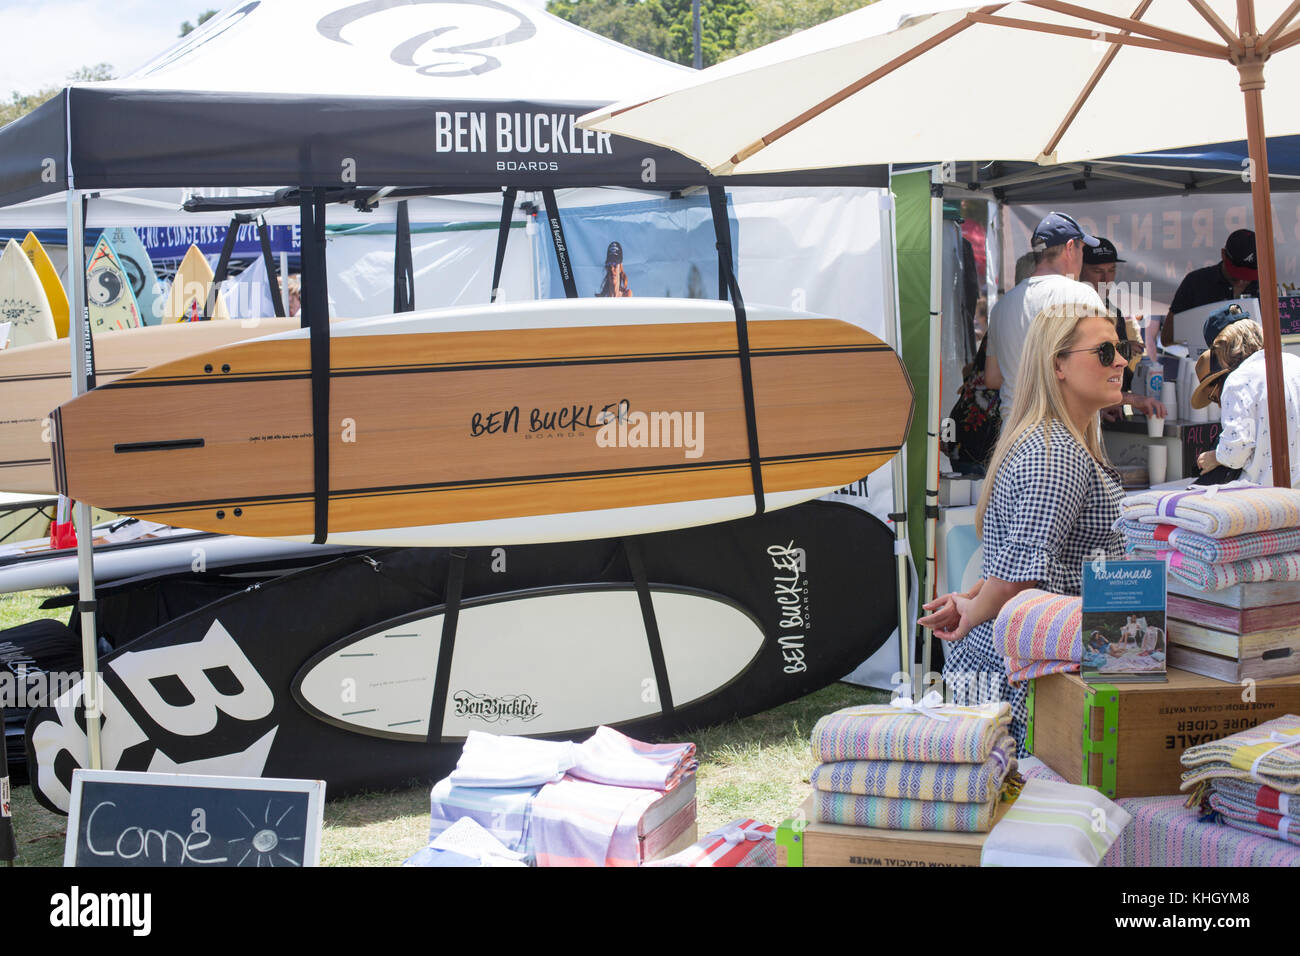 Avalon Beach, Sydney, Sunday 19th November 2017. The annual community market day at Avalon Beach features over 400 stalls selling crafts, clothing, jewellry, art and gifts. Credit: martin berry/Alamy Live News Stock Photo